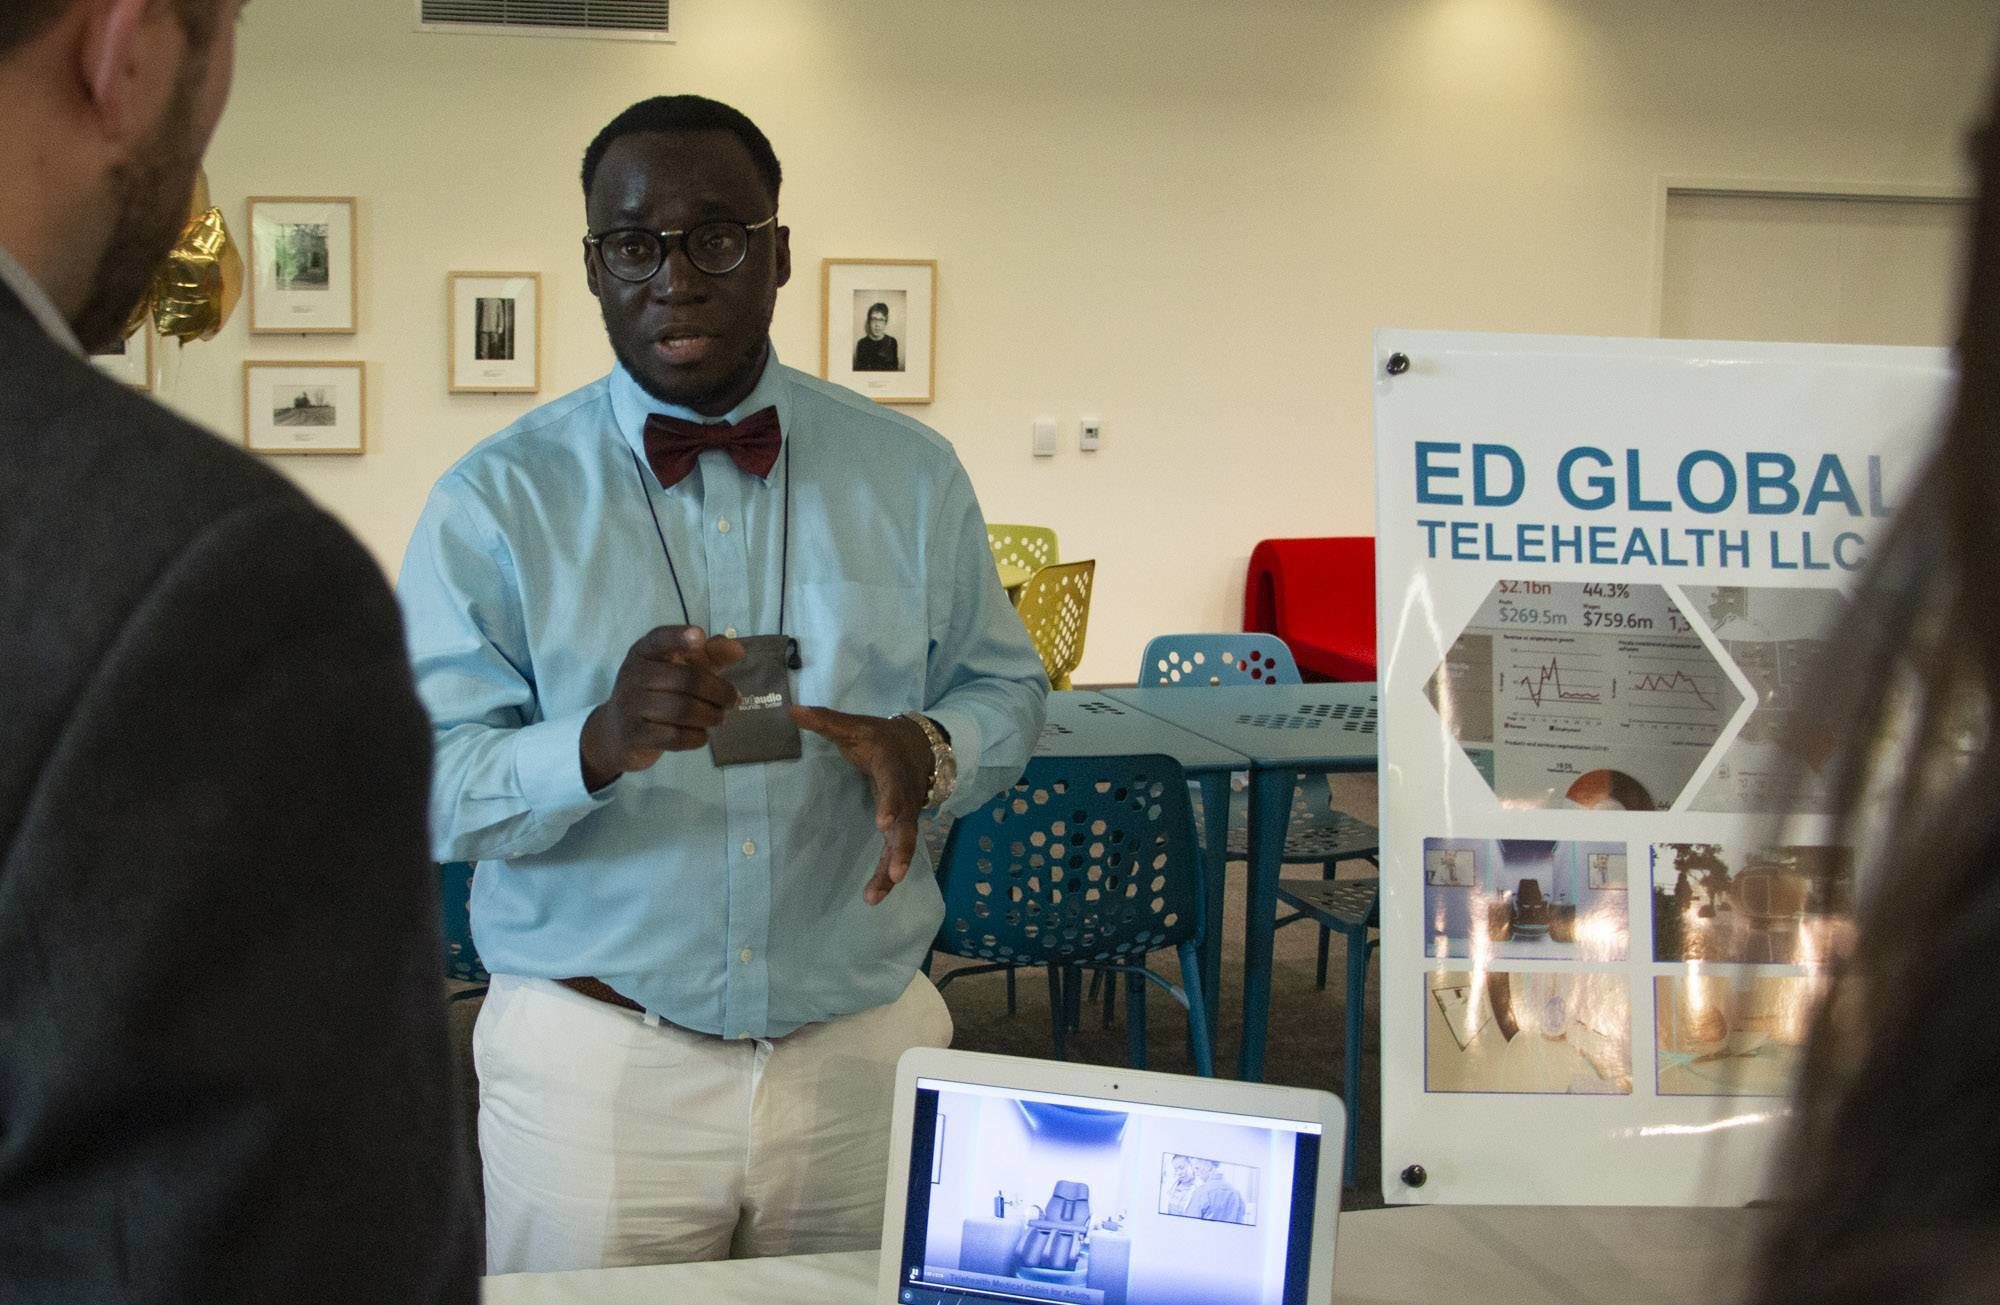 A Black man in a blue shirt and black bowtie is standing behind a table, gesturing and talking to someone.